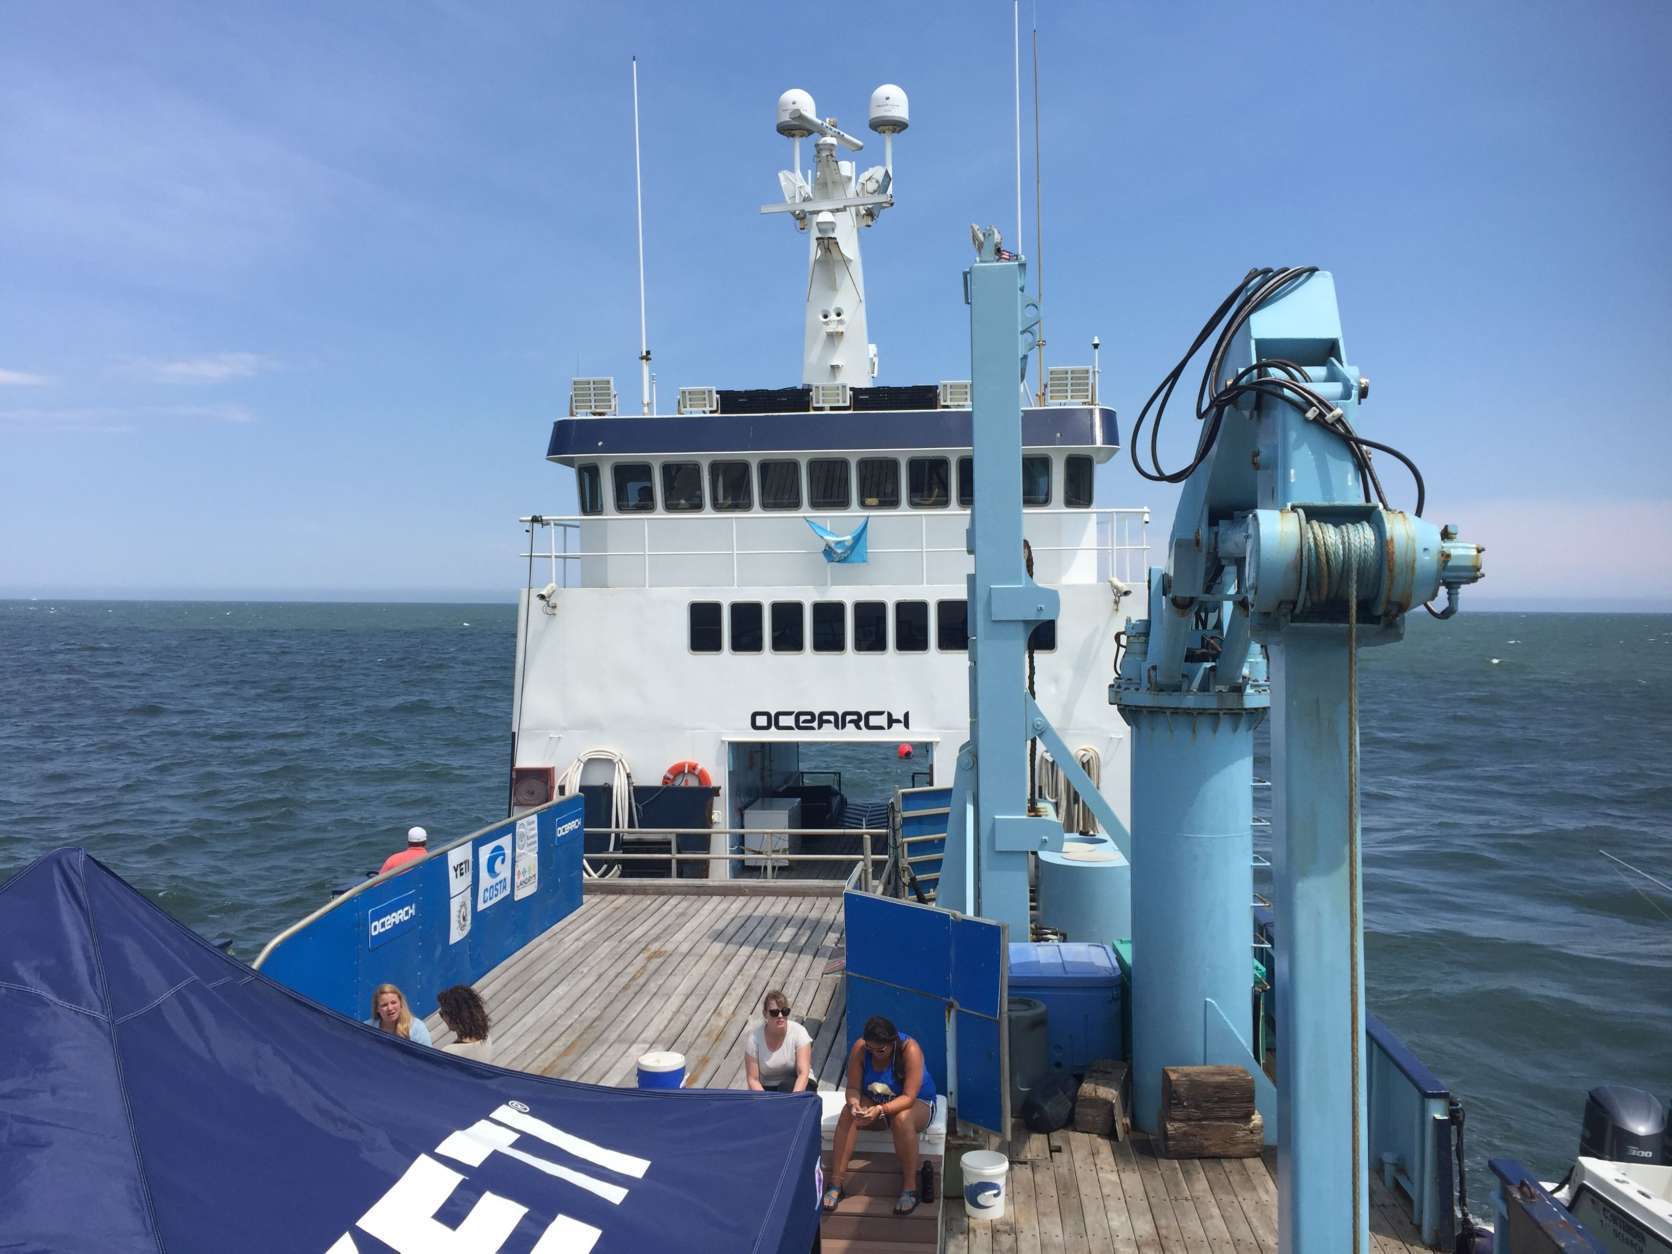 If this kind of boat looks familiar, it's because the OCEARCH is actually a decommissioned crab boat. (WTOP/Michelle Basch)